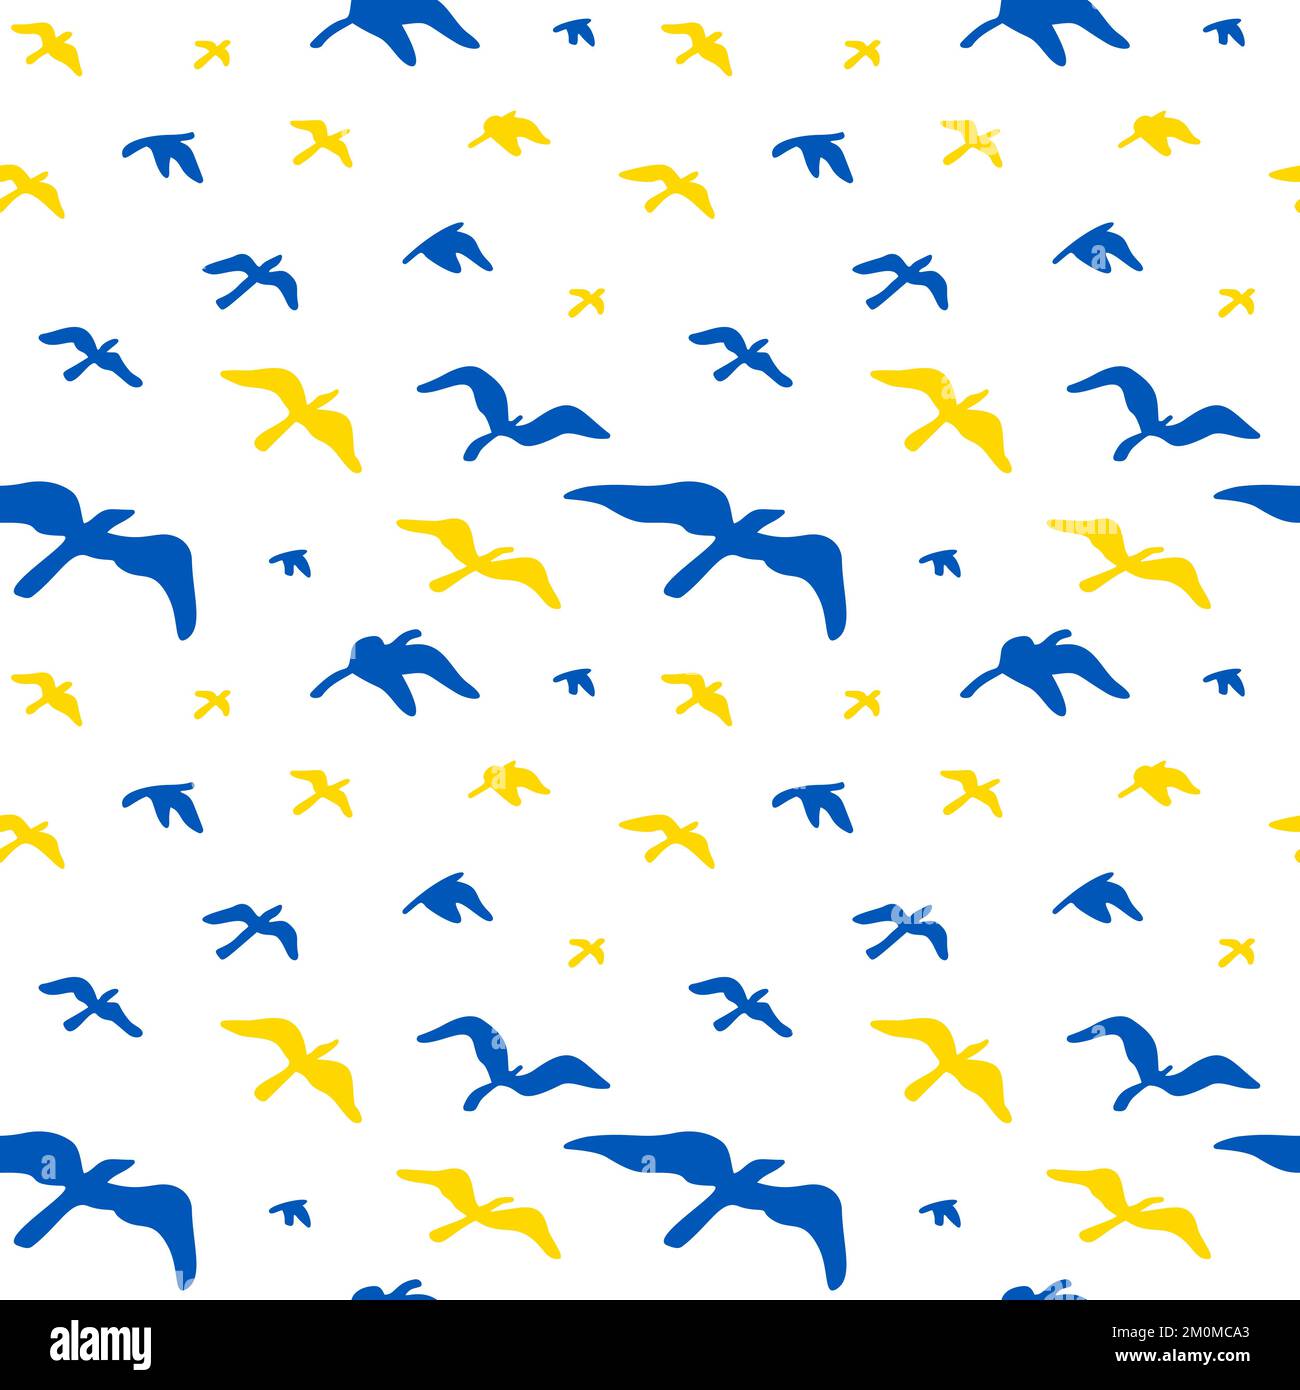 Seamless pattern with flying birds in Ukrainian flag yellow and blue colors. Vector illustration Stock Vector